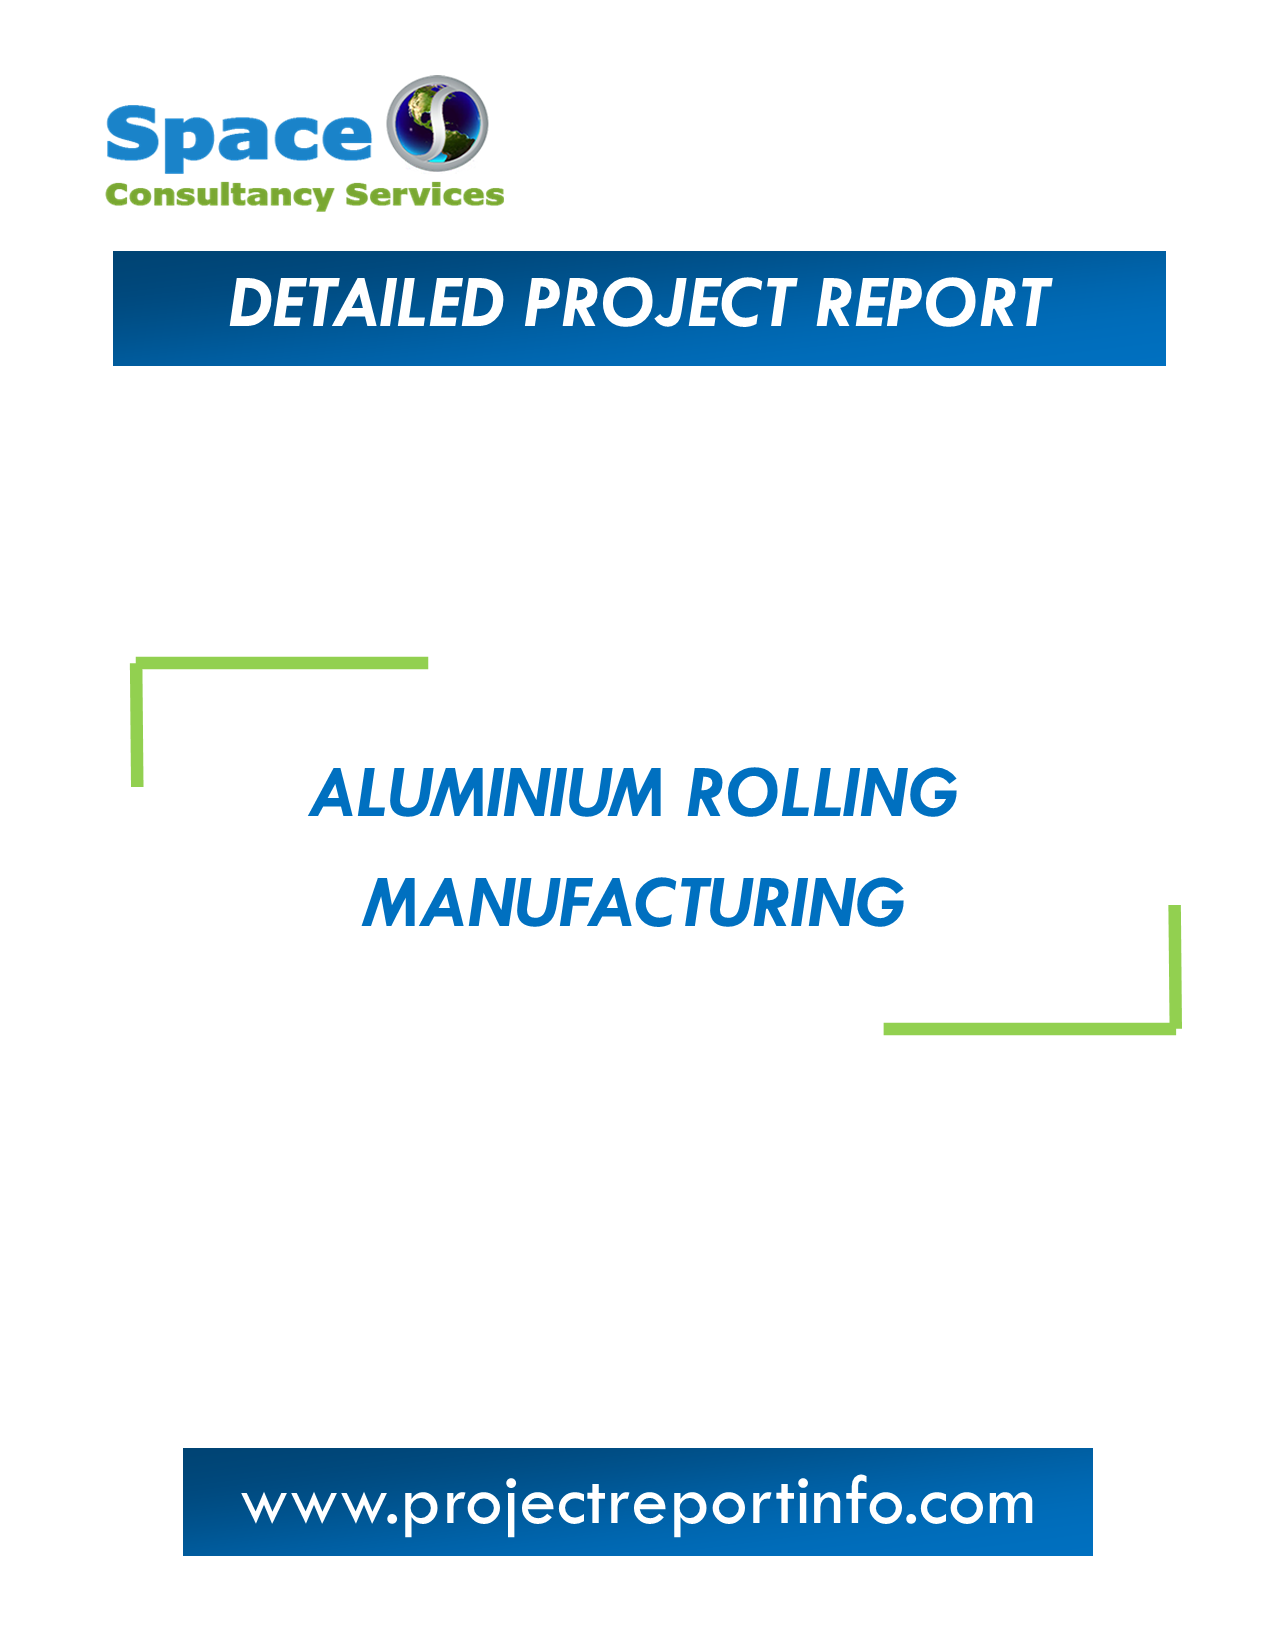 Project Report on Aluminium Rolling Manufacturing